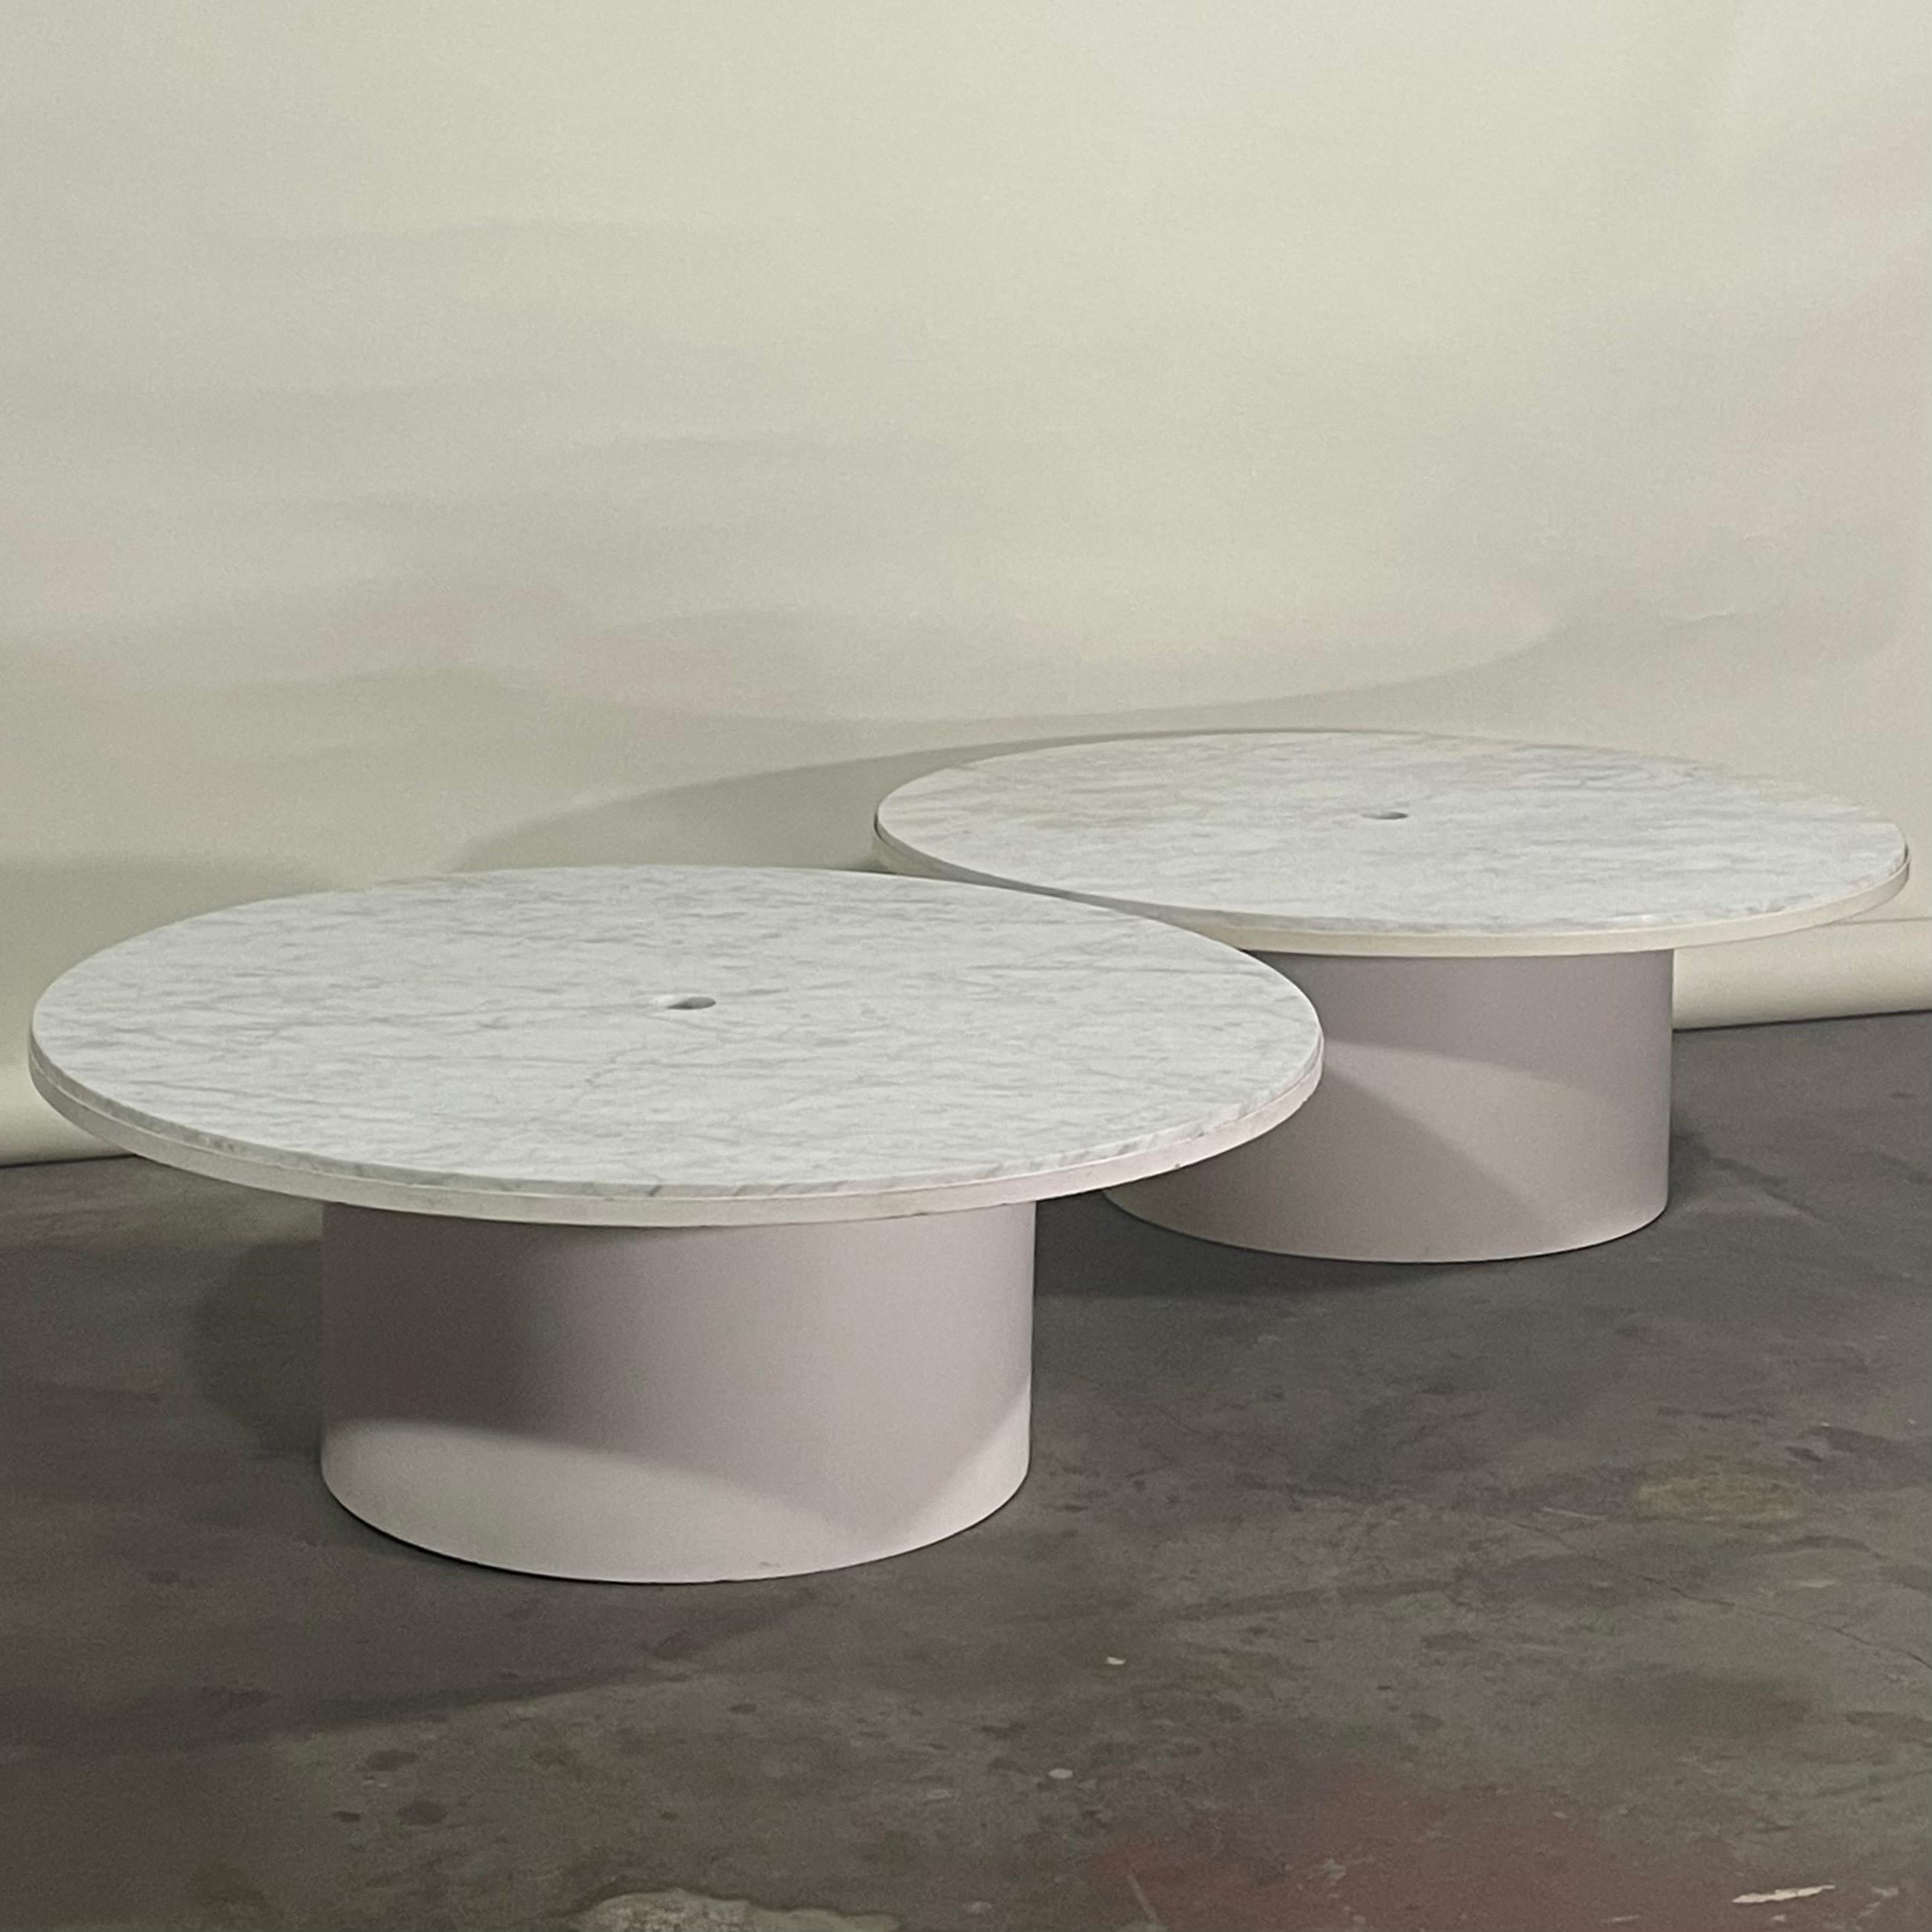 Pair of Minimalist Veined Marble Indoor/Outdoor Coffee Tables In Distressed Condition For Sale In Los Angeles, CA